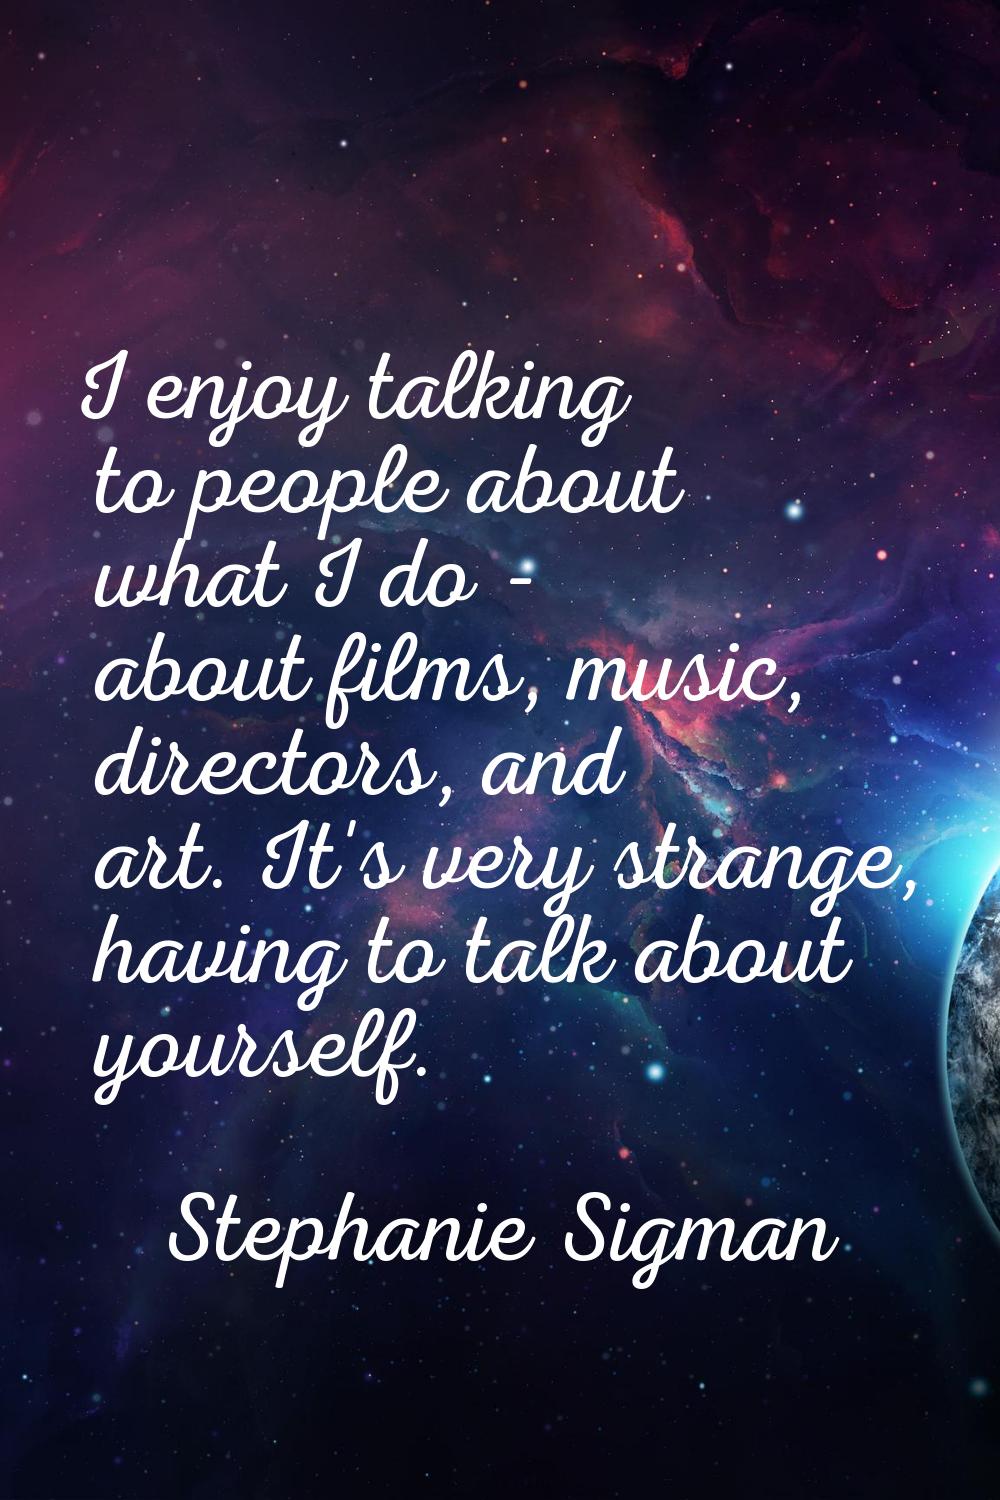 I enjoy talking to people about what I do - about films, music, directors, and art. It's very stran